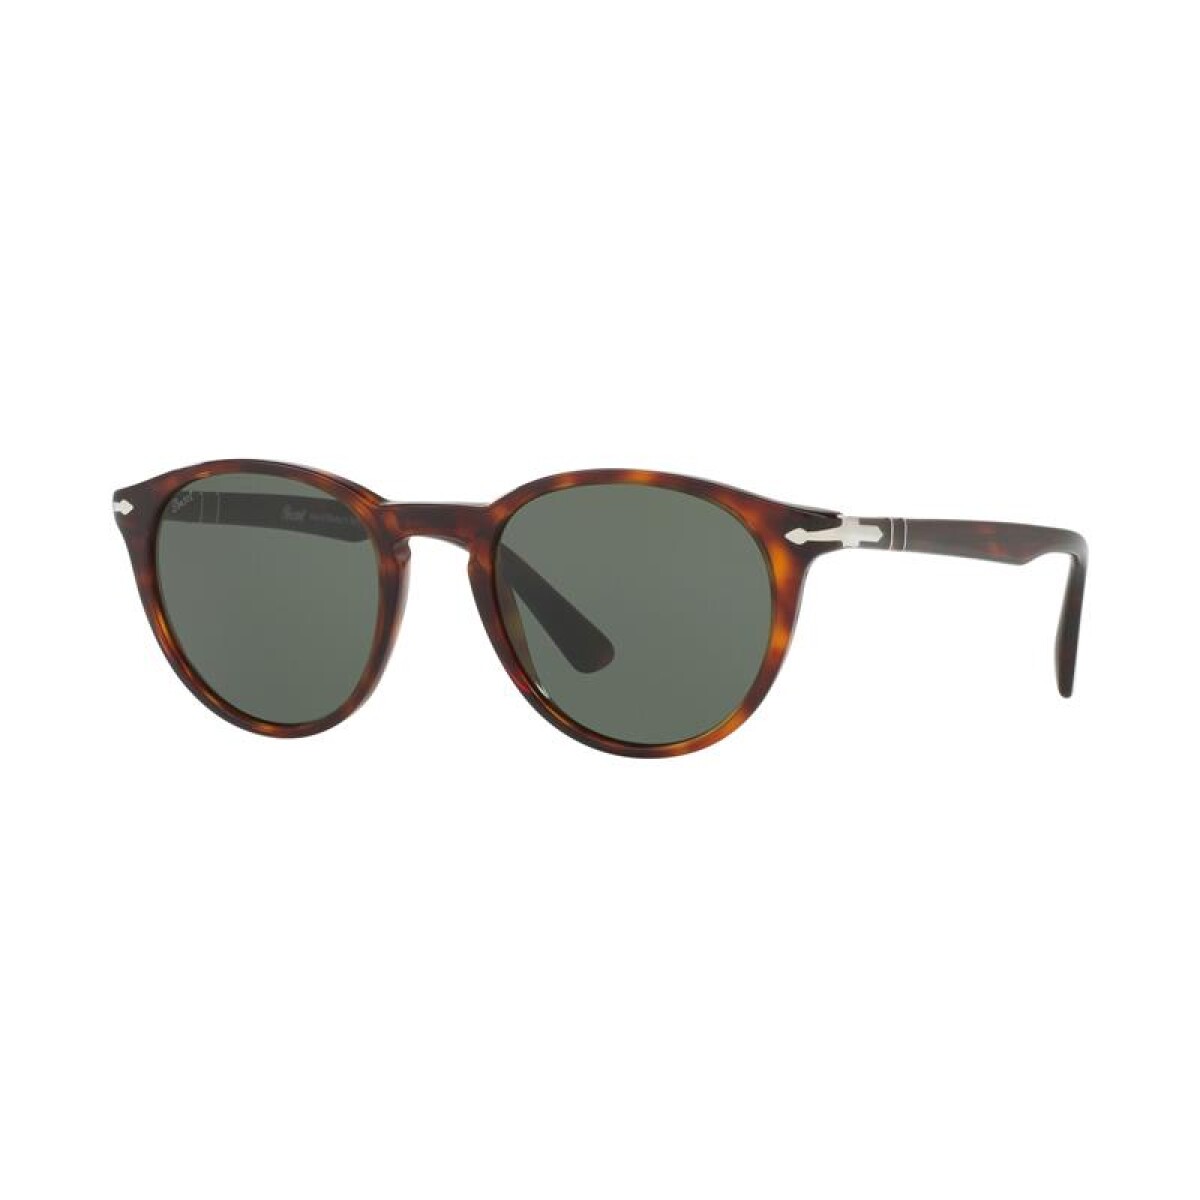 Persol 3152-s - 9015/31 